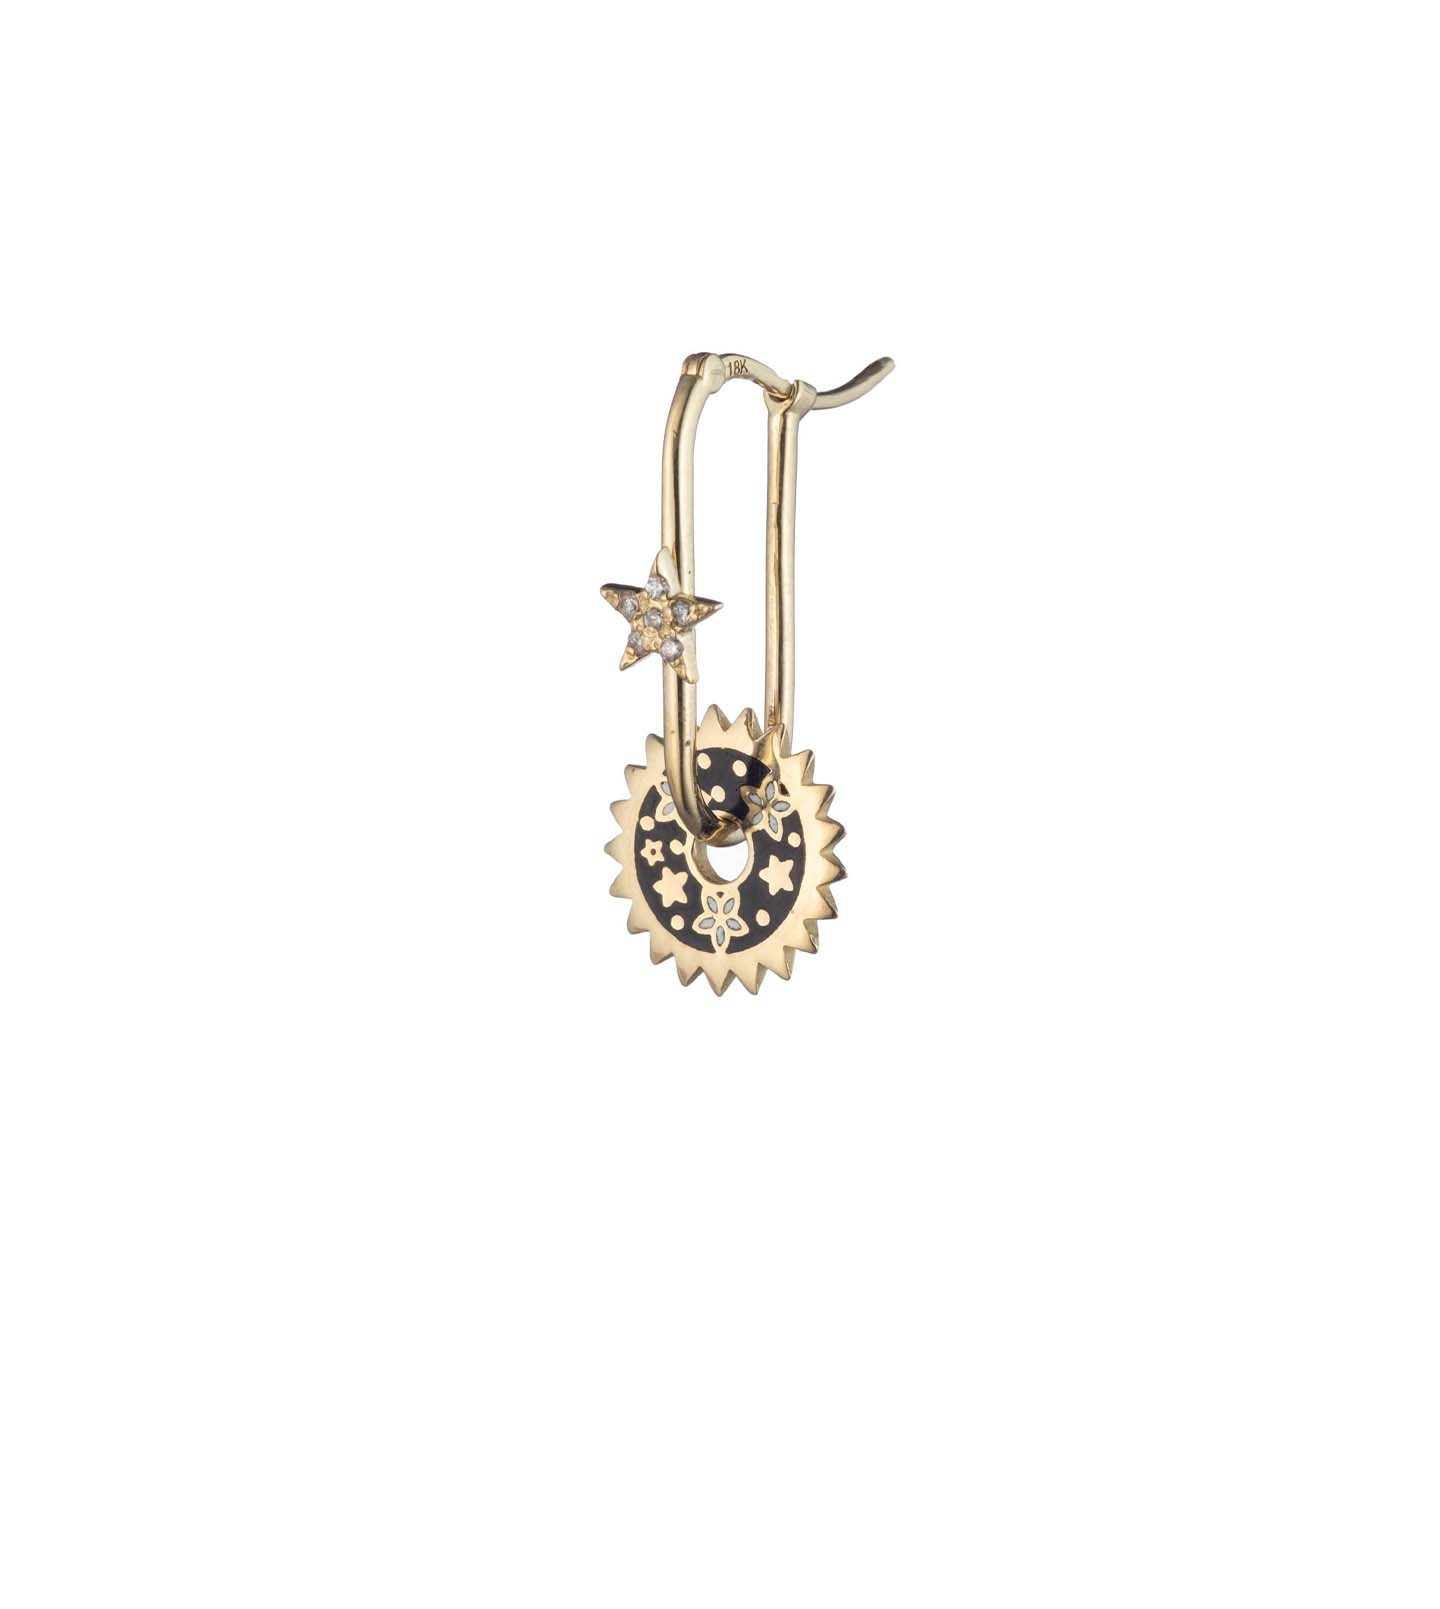 Dark Blossoms - Resilience : Small Pave Star Fob Earring Story